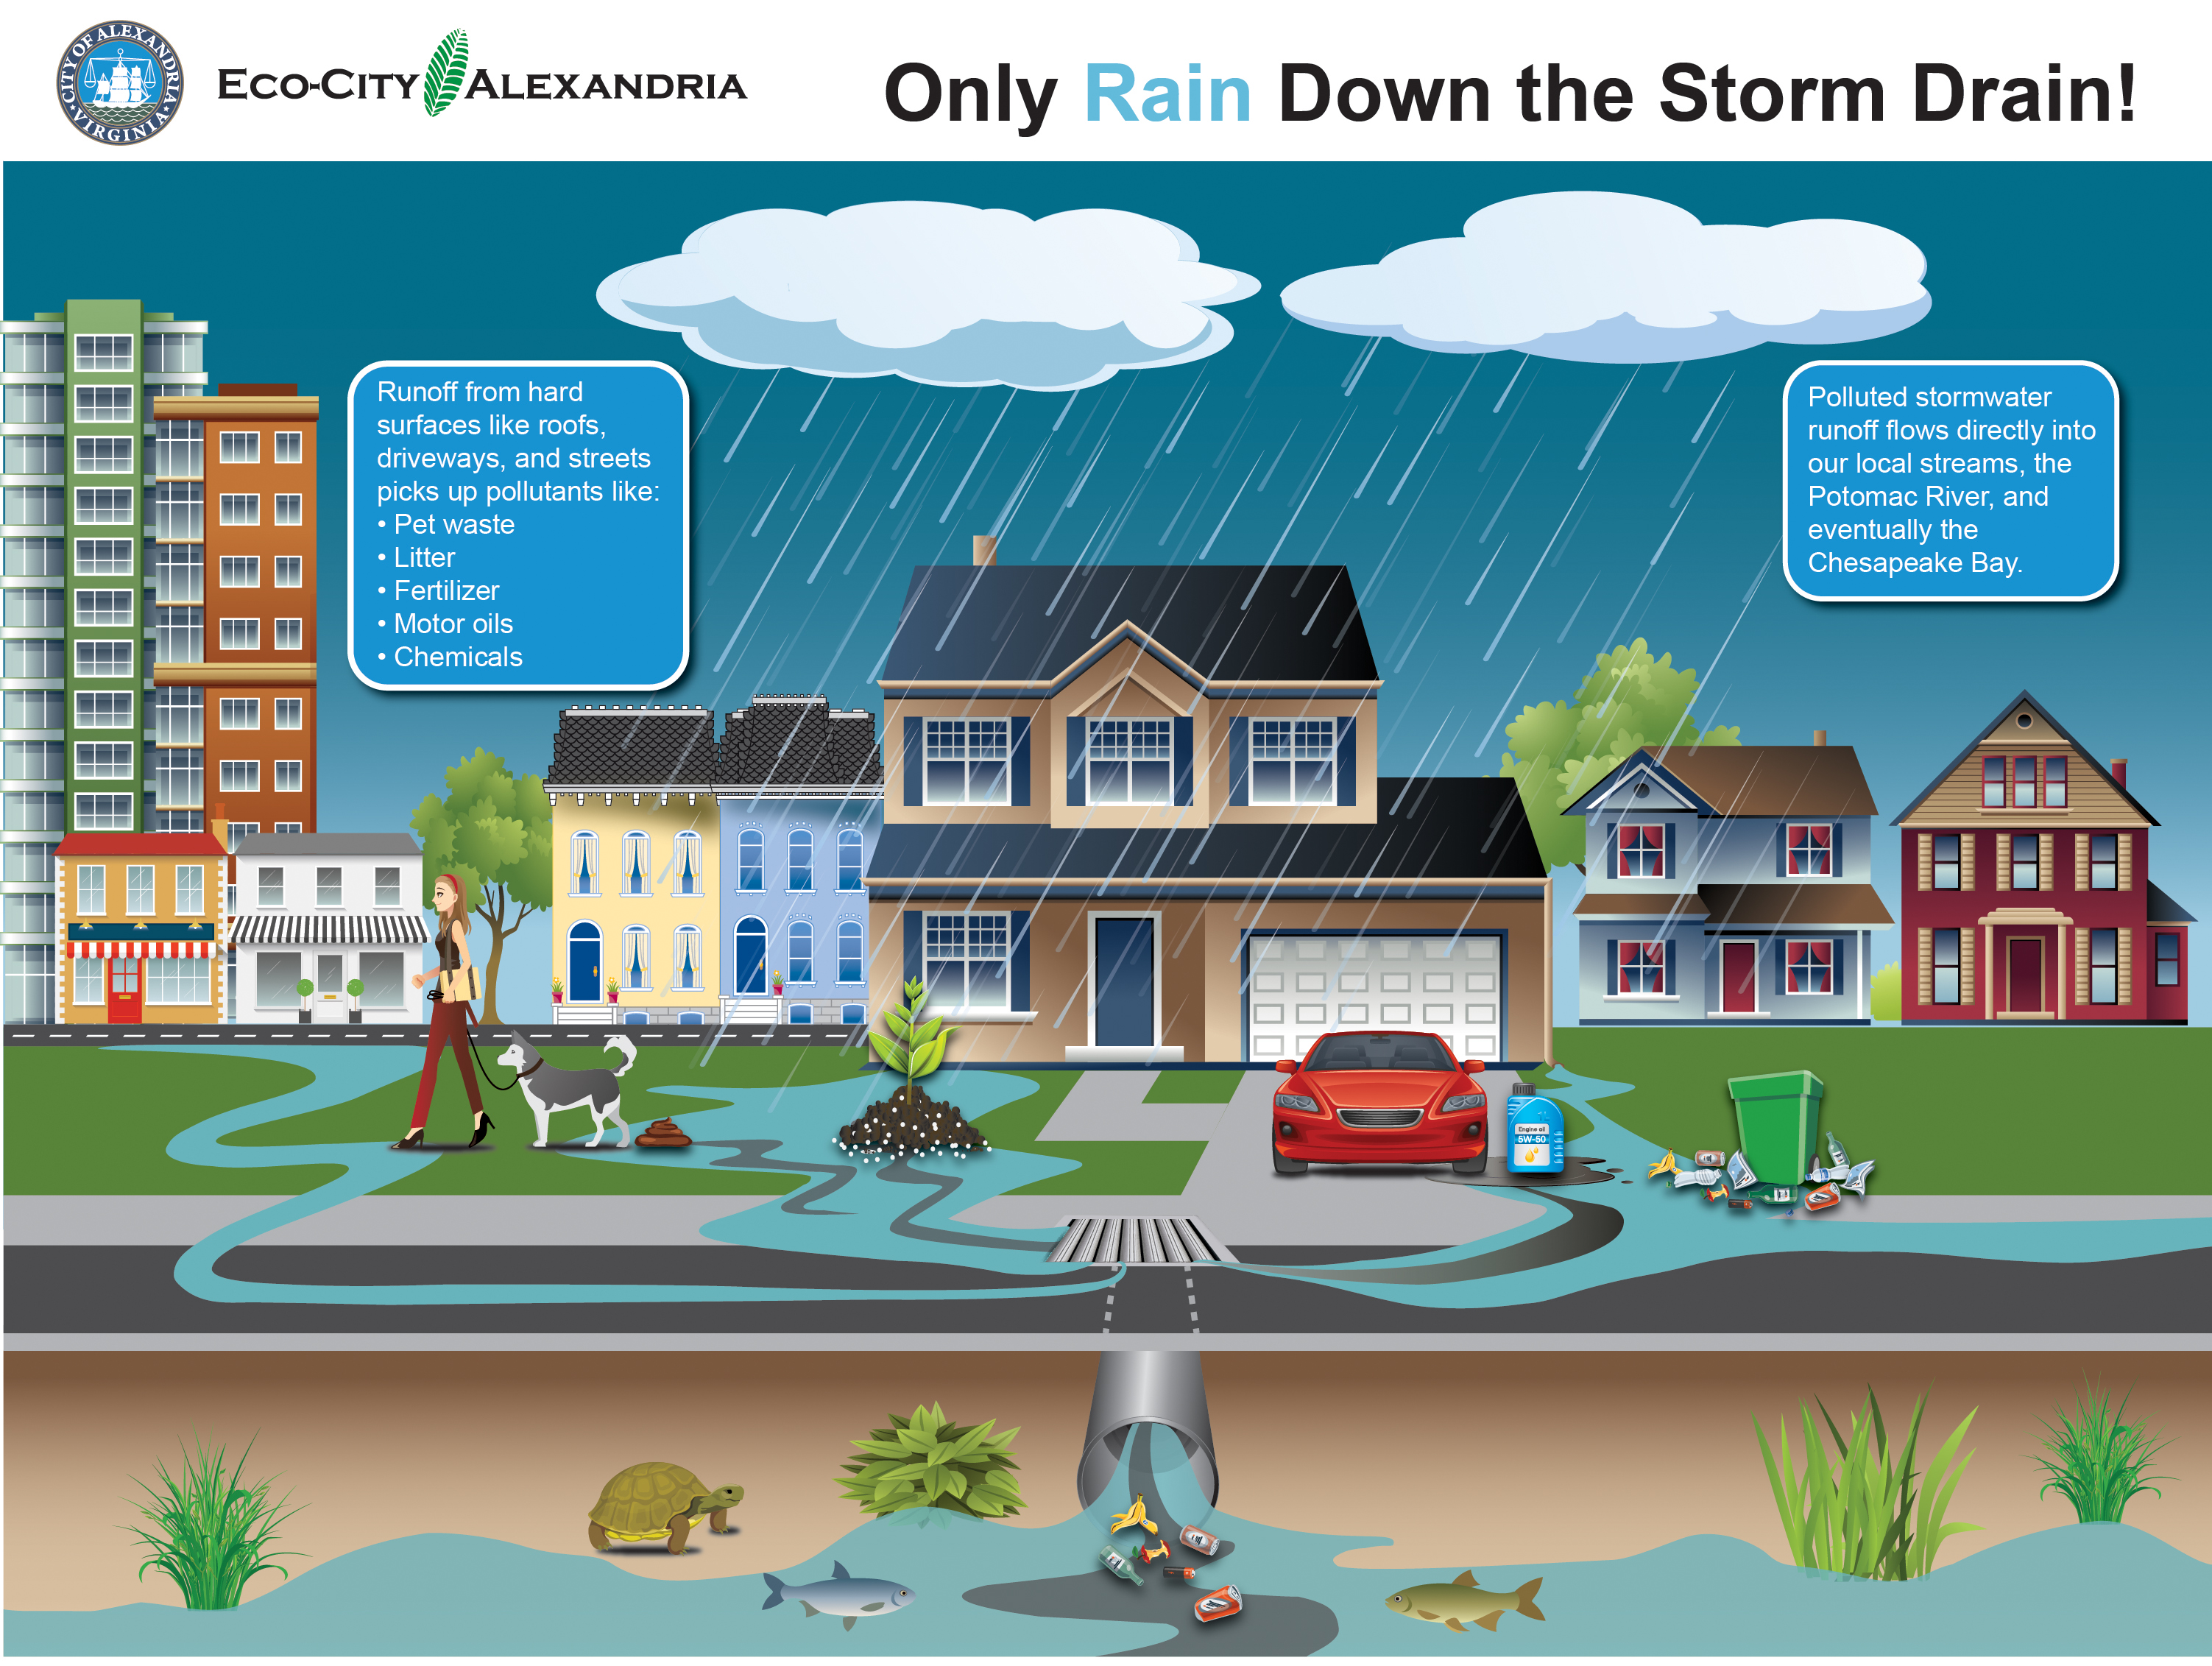 Only Rain Down the Storm Drain infographic